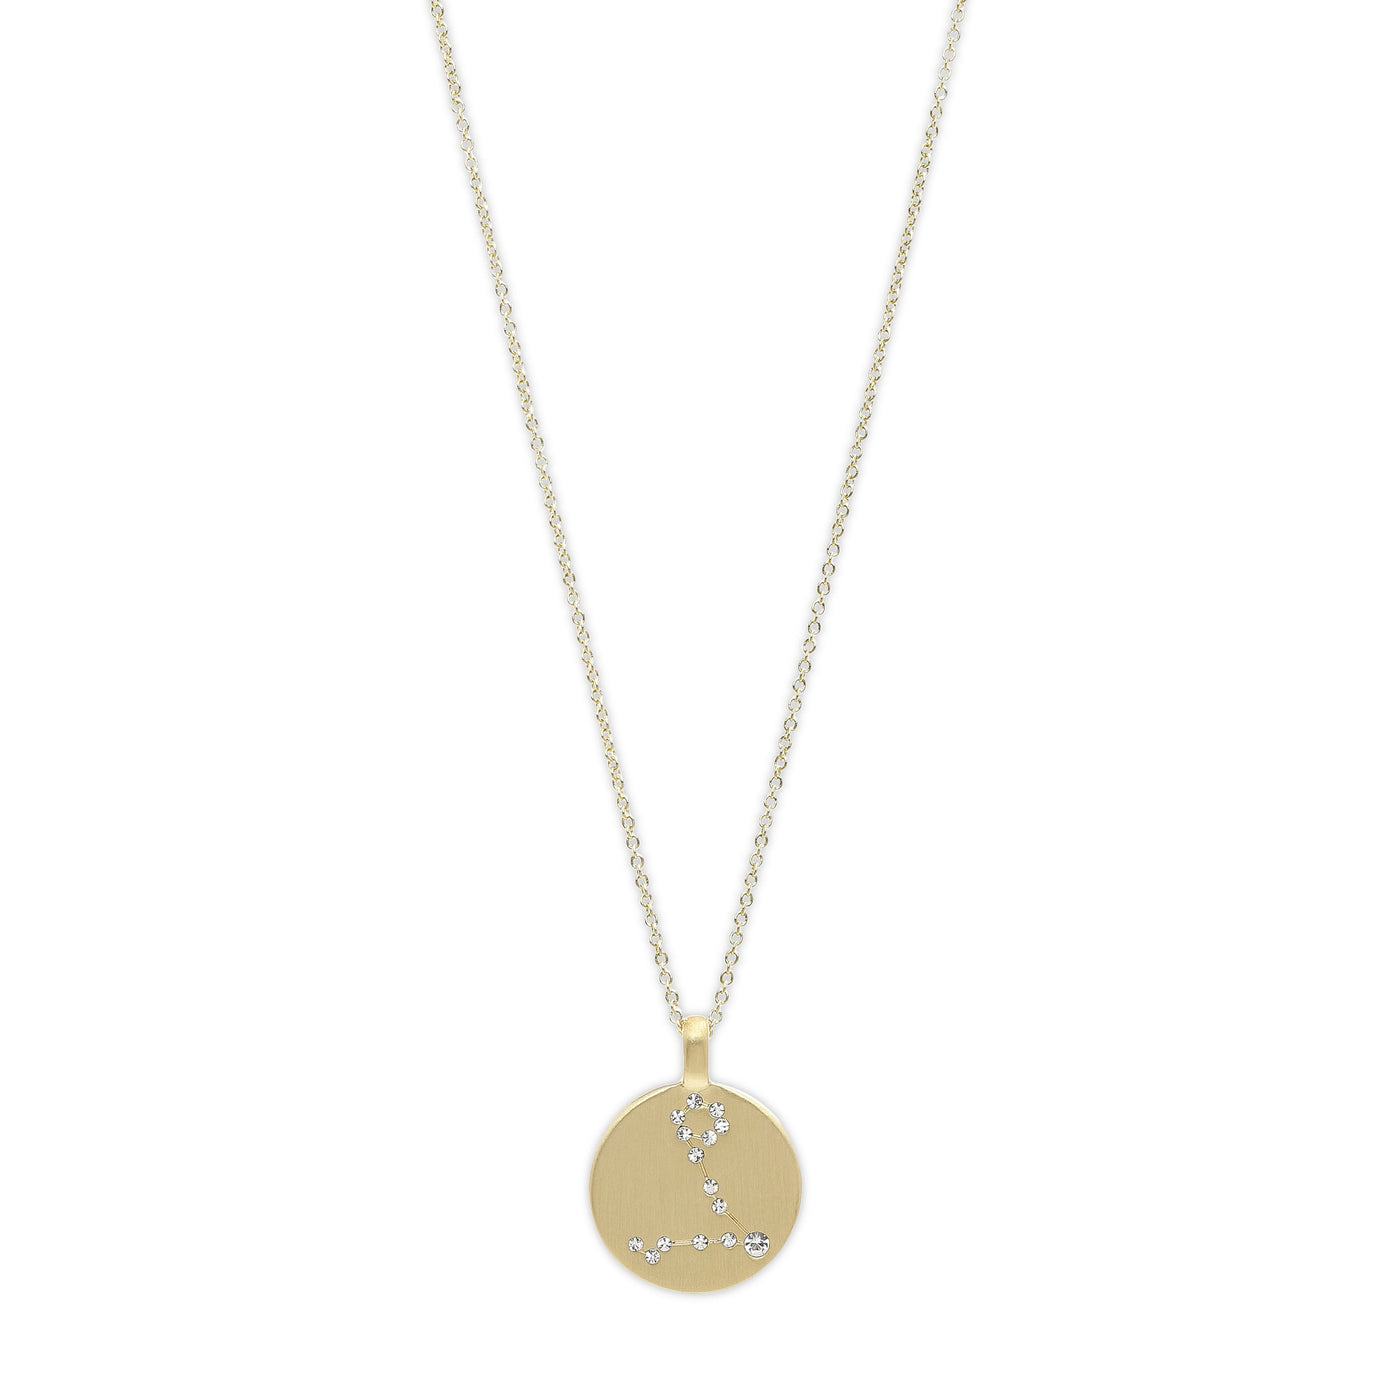 Gold Plated Horoscope Necklace